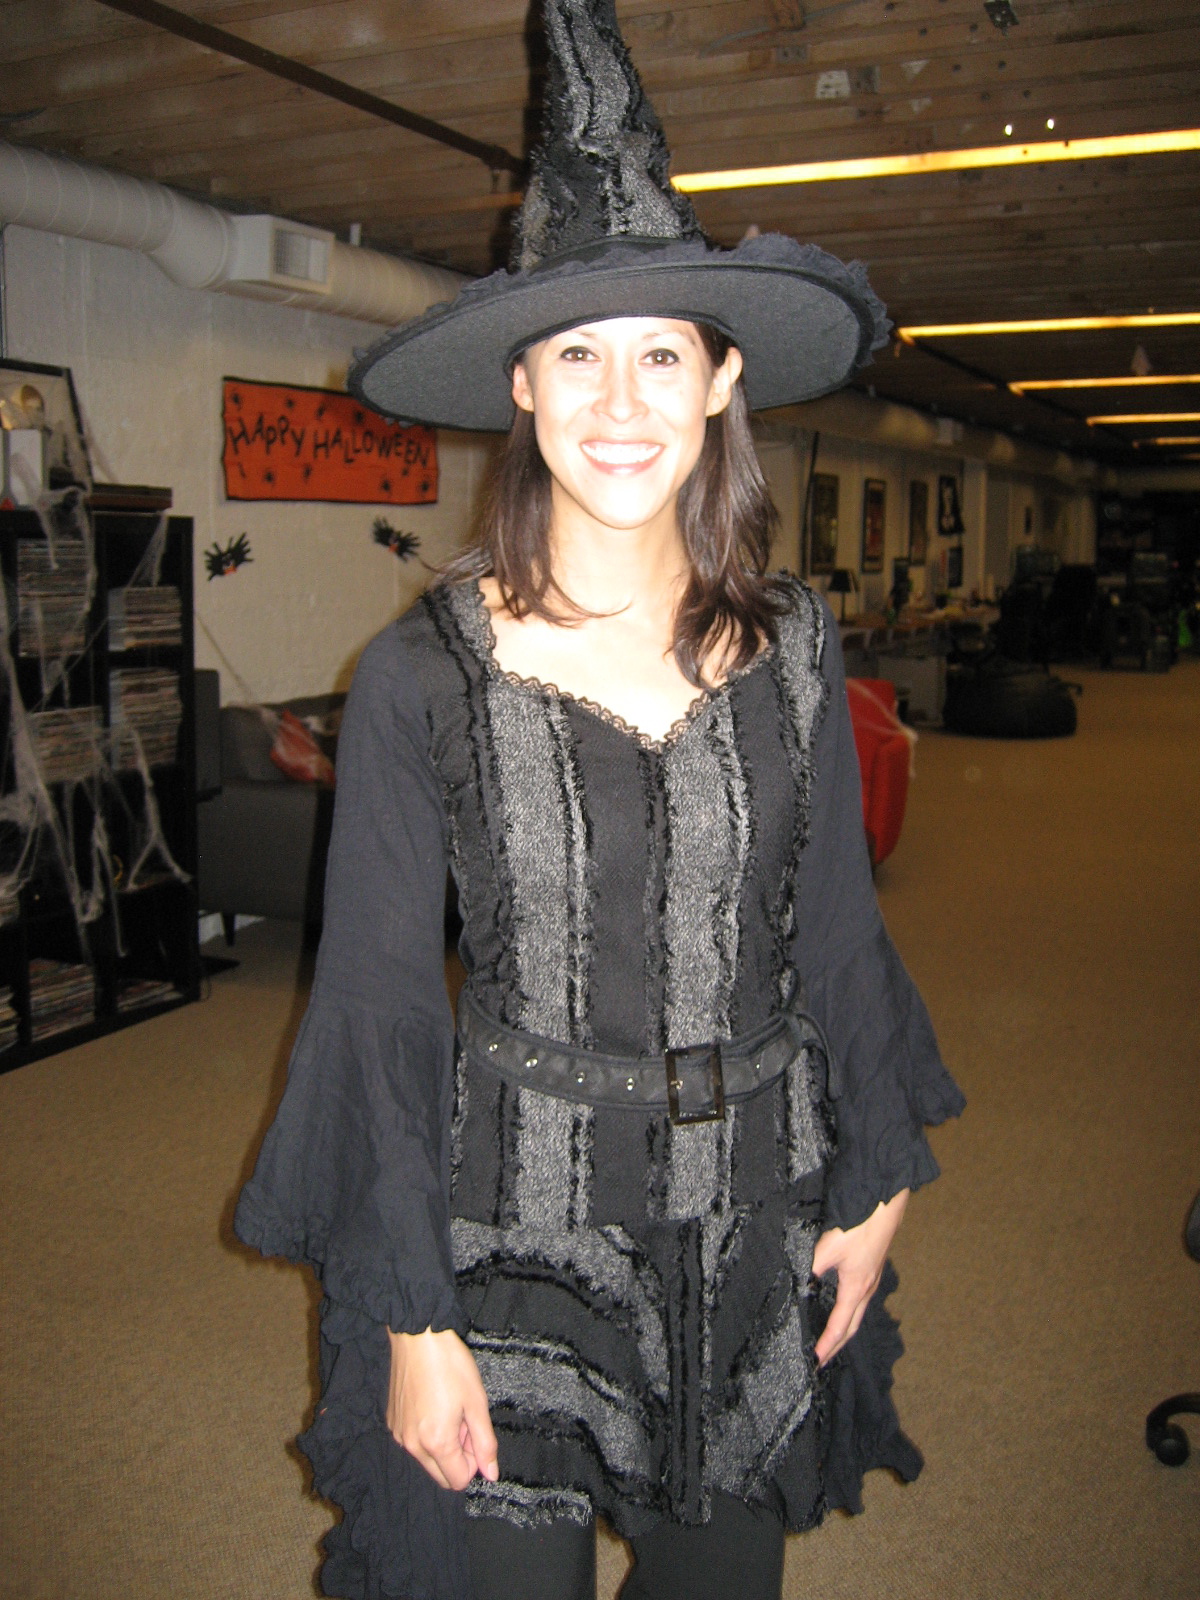 Witch or Cher costume, you decide!